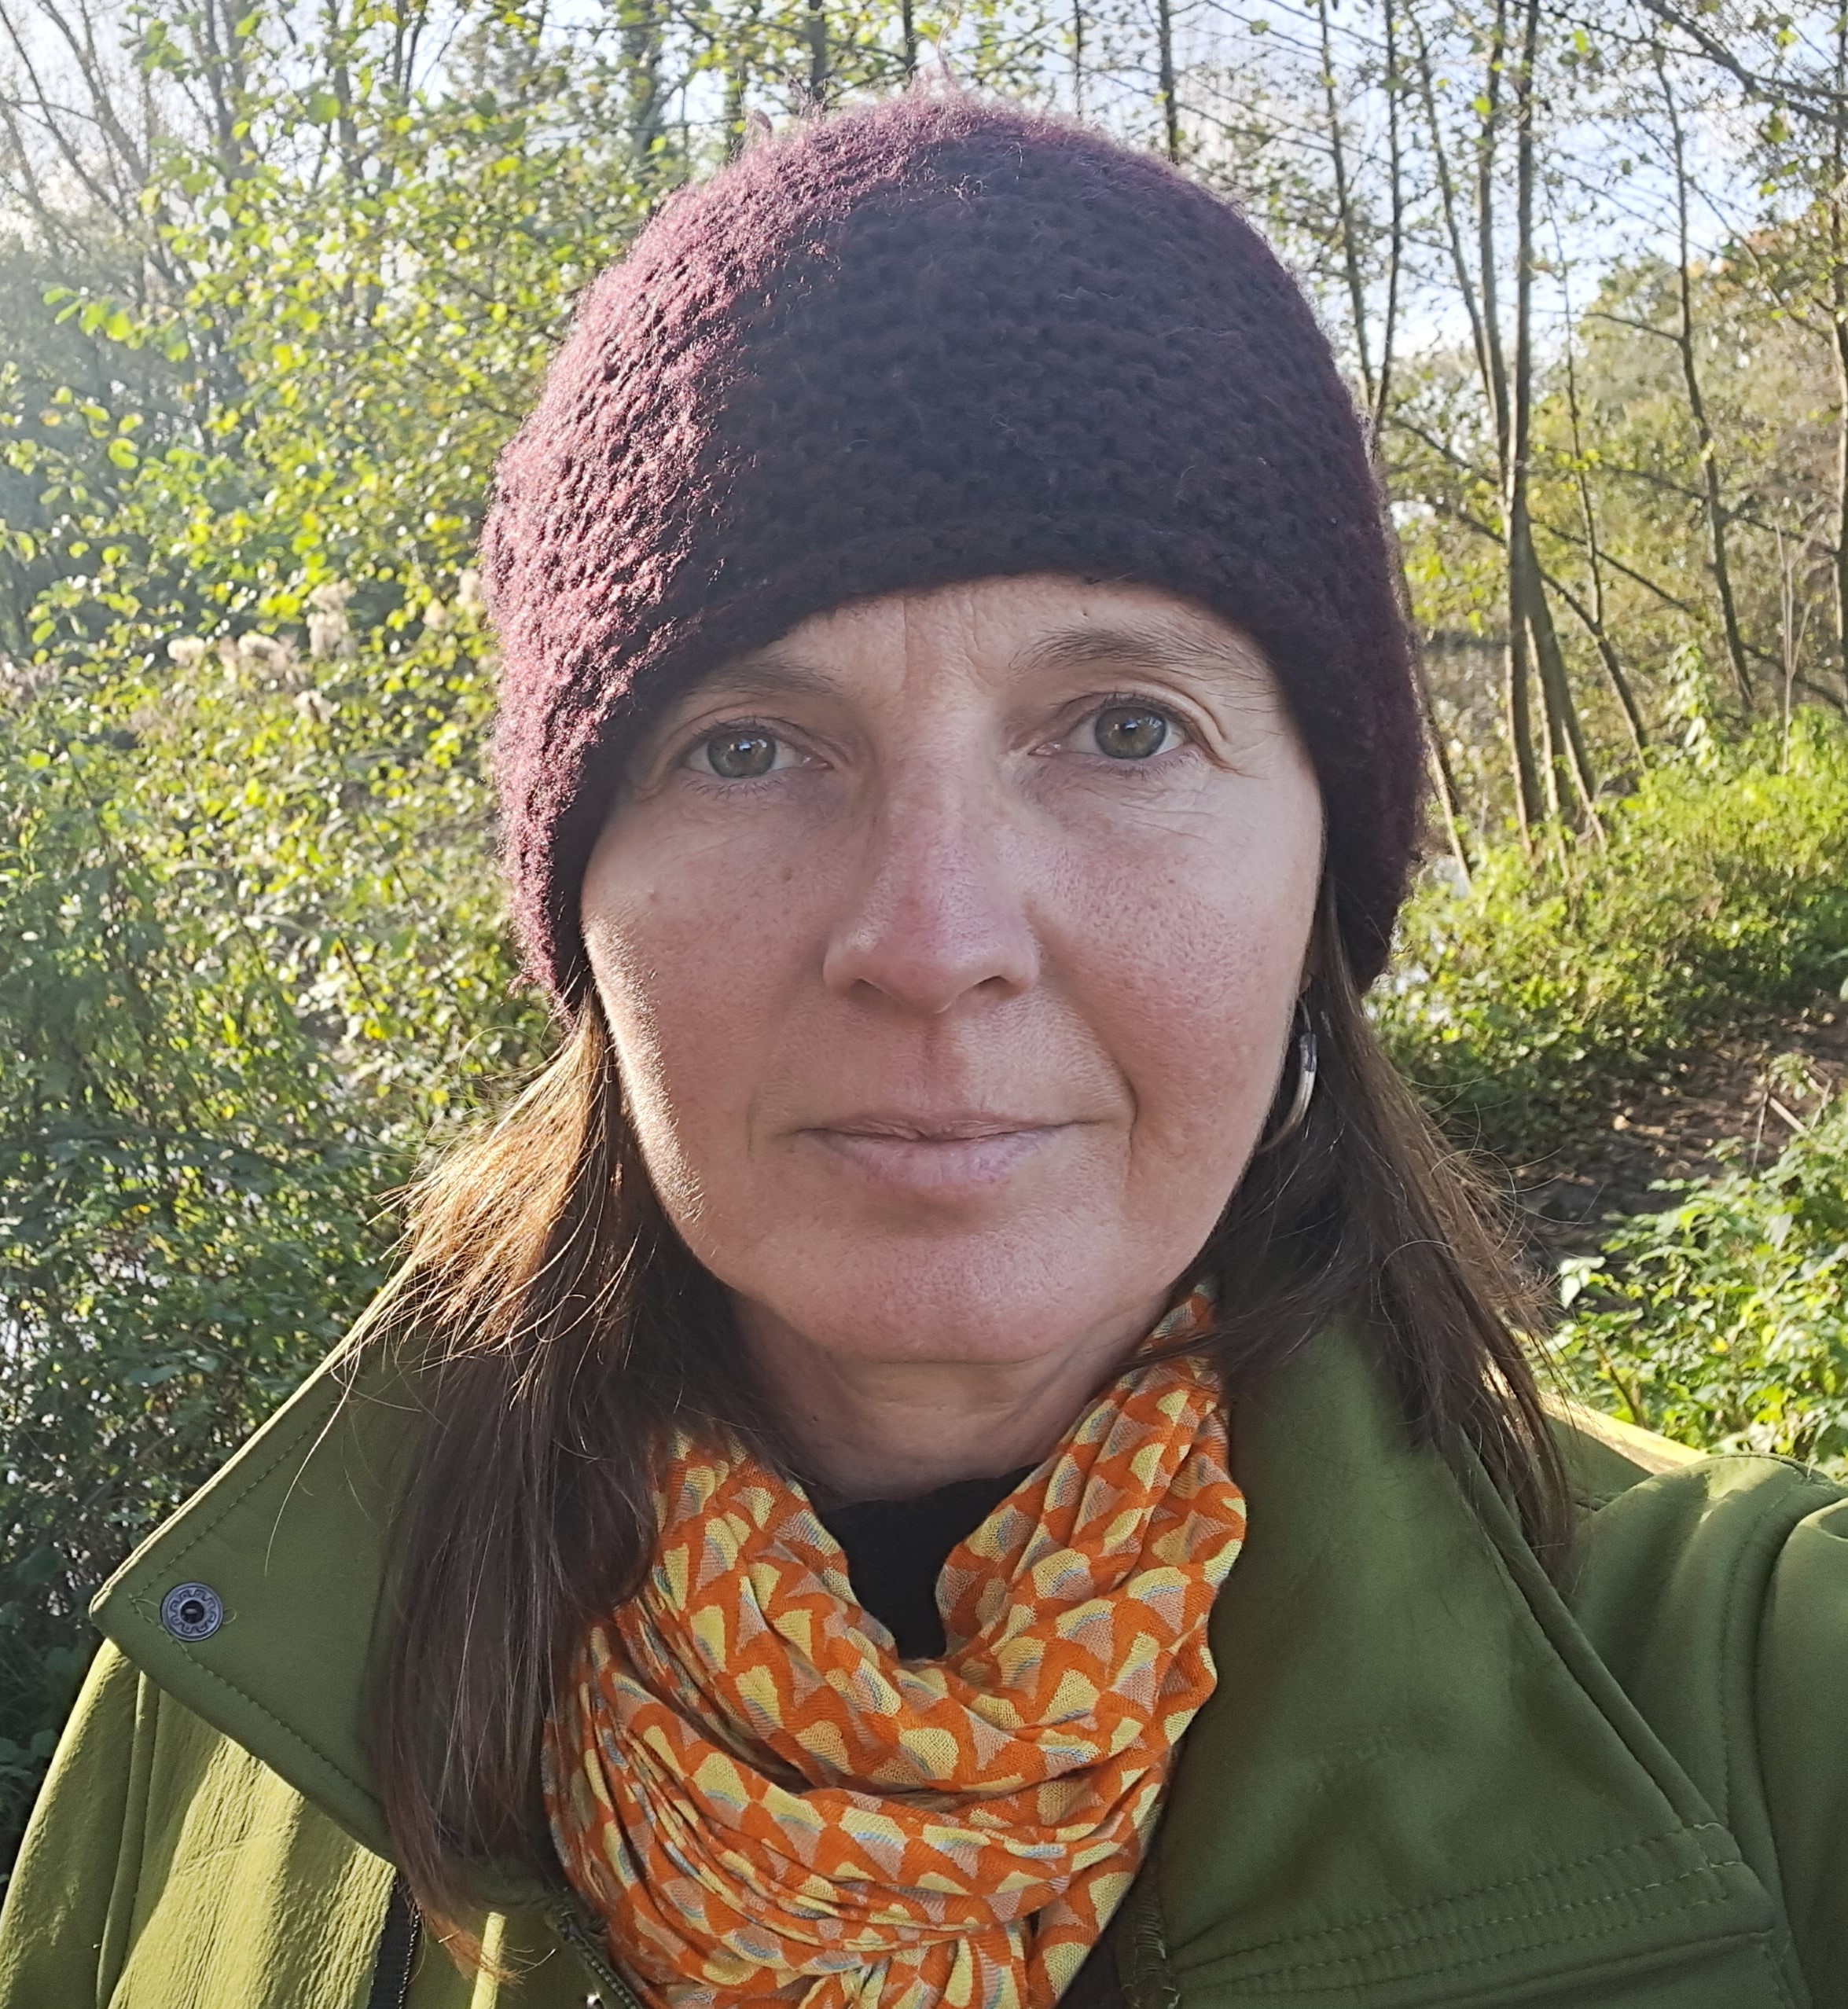 A photo of a woman wearing a wooley hat, green coat and mustard coloured scarf out in nature